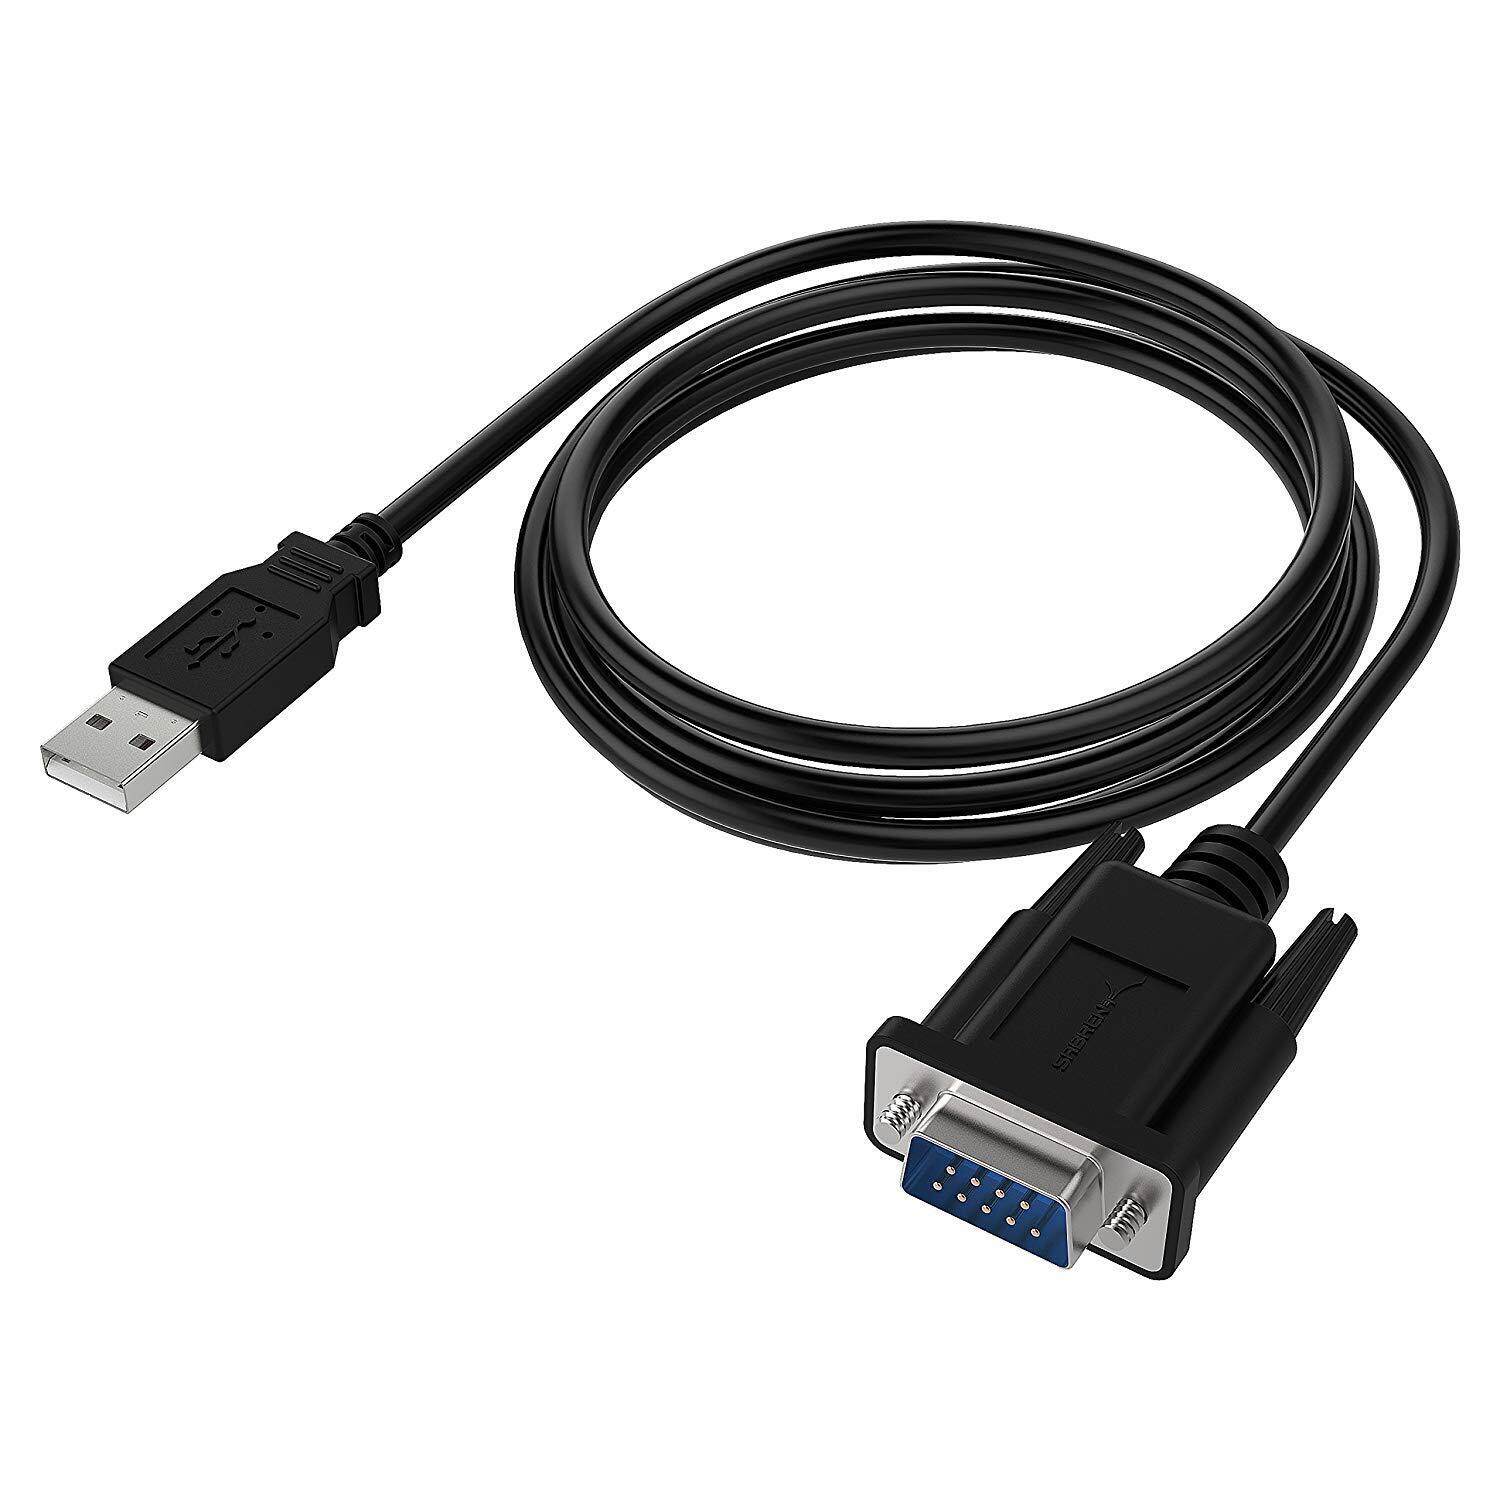 SABRENT USB 2.0 to Serial (9-Pin) DB-9 RS-232 Adapter Cable 6ft Cable